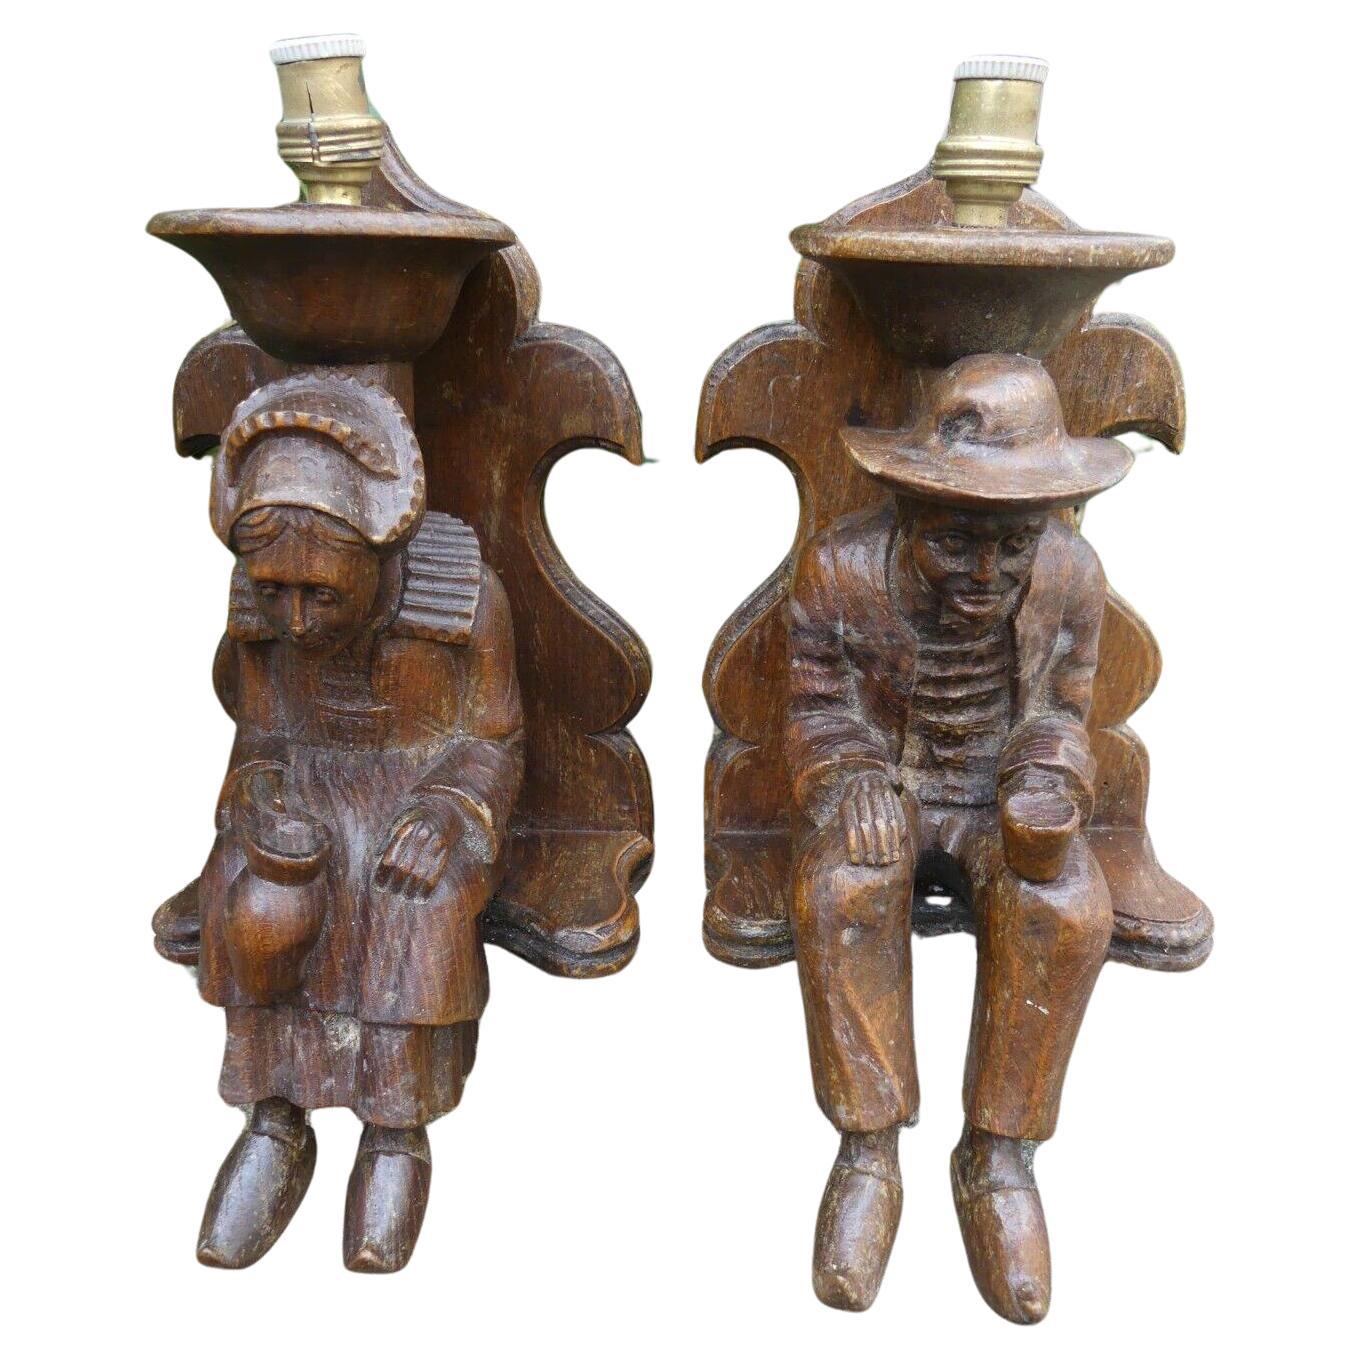 c1920's French Folk Art/ Carved Wood Figural Breton Couple Wall Sconces For Sale